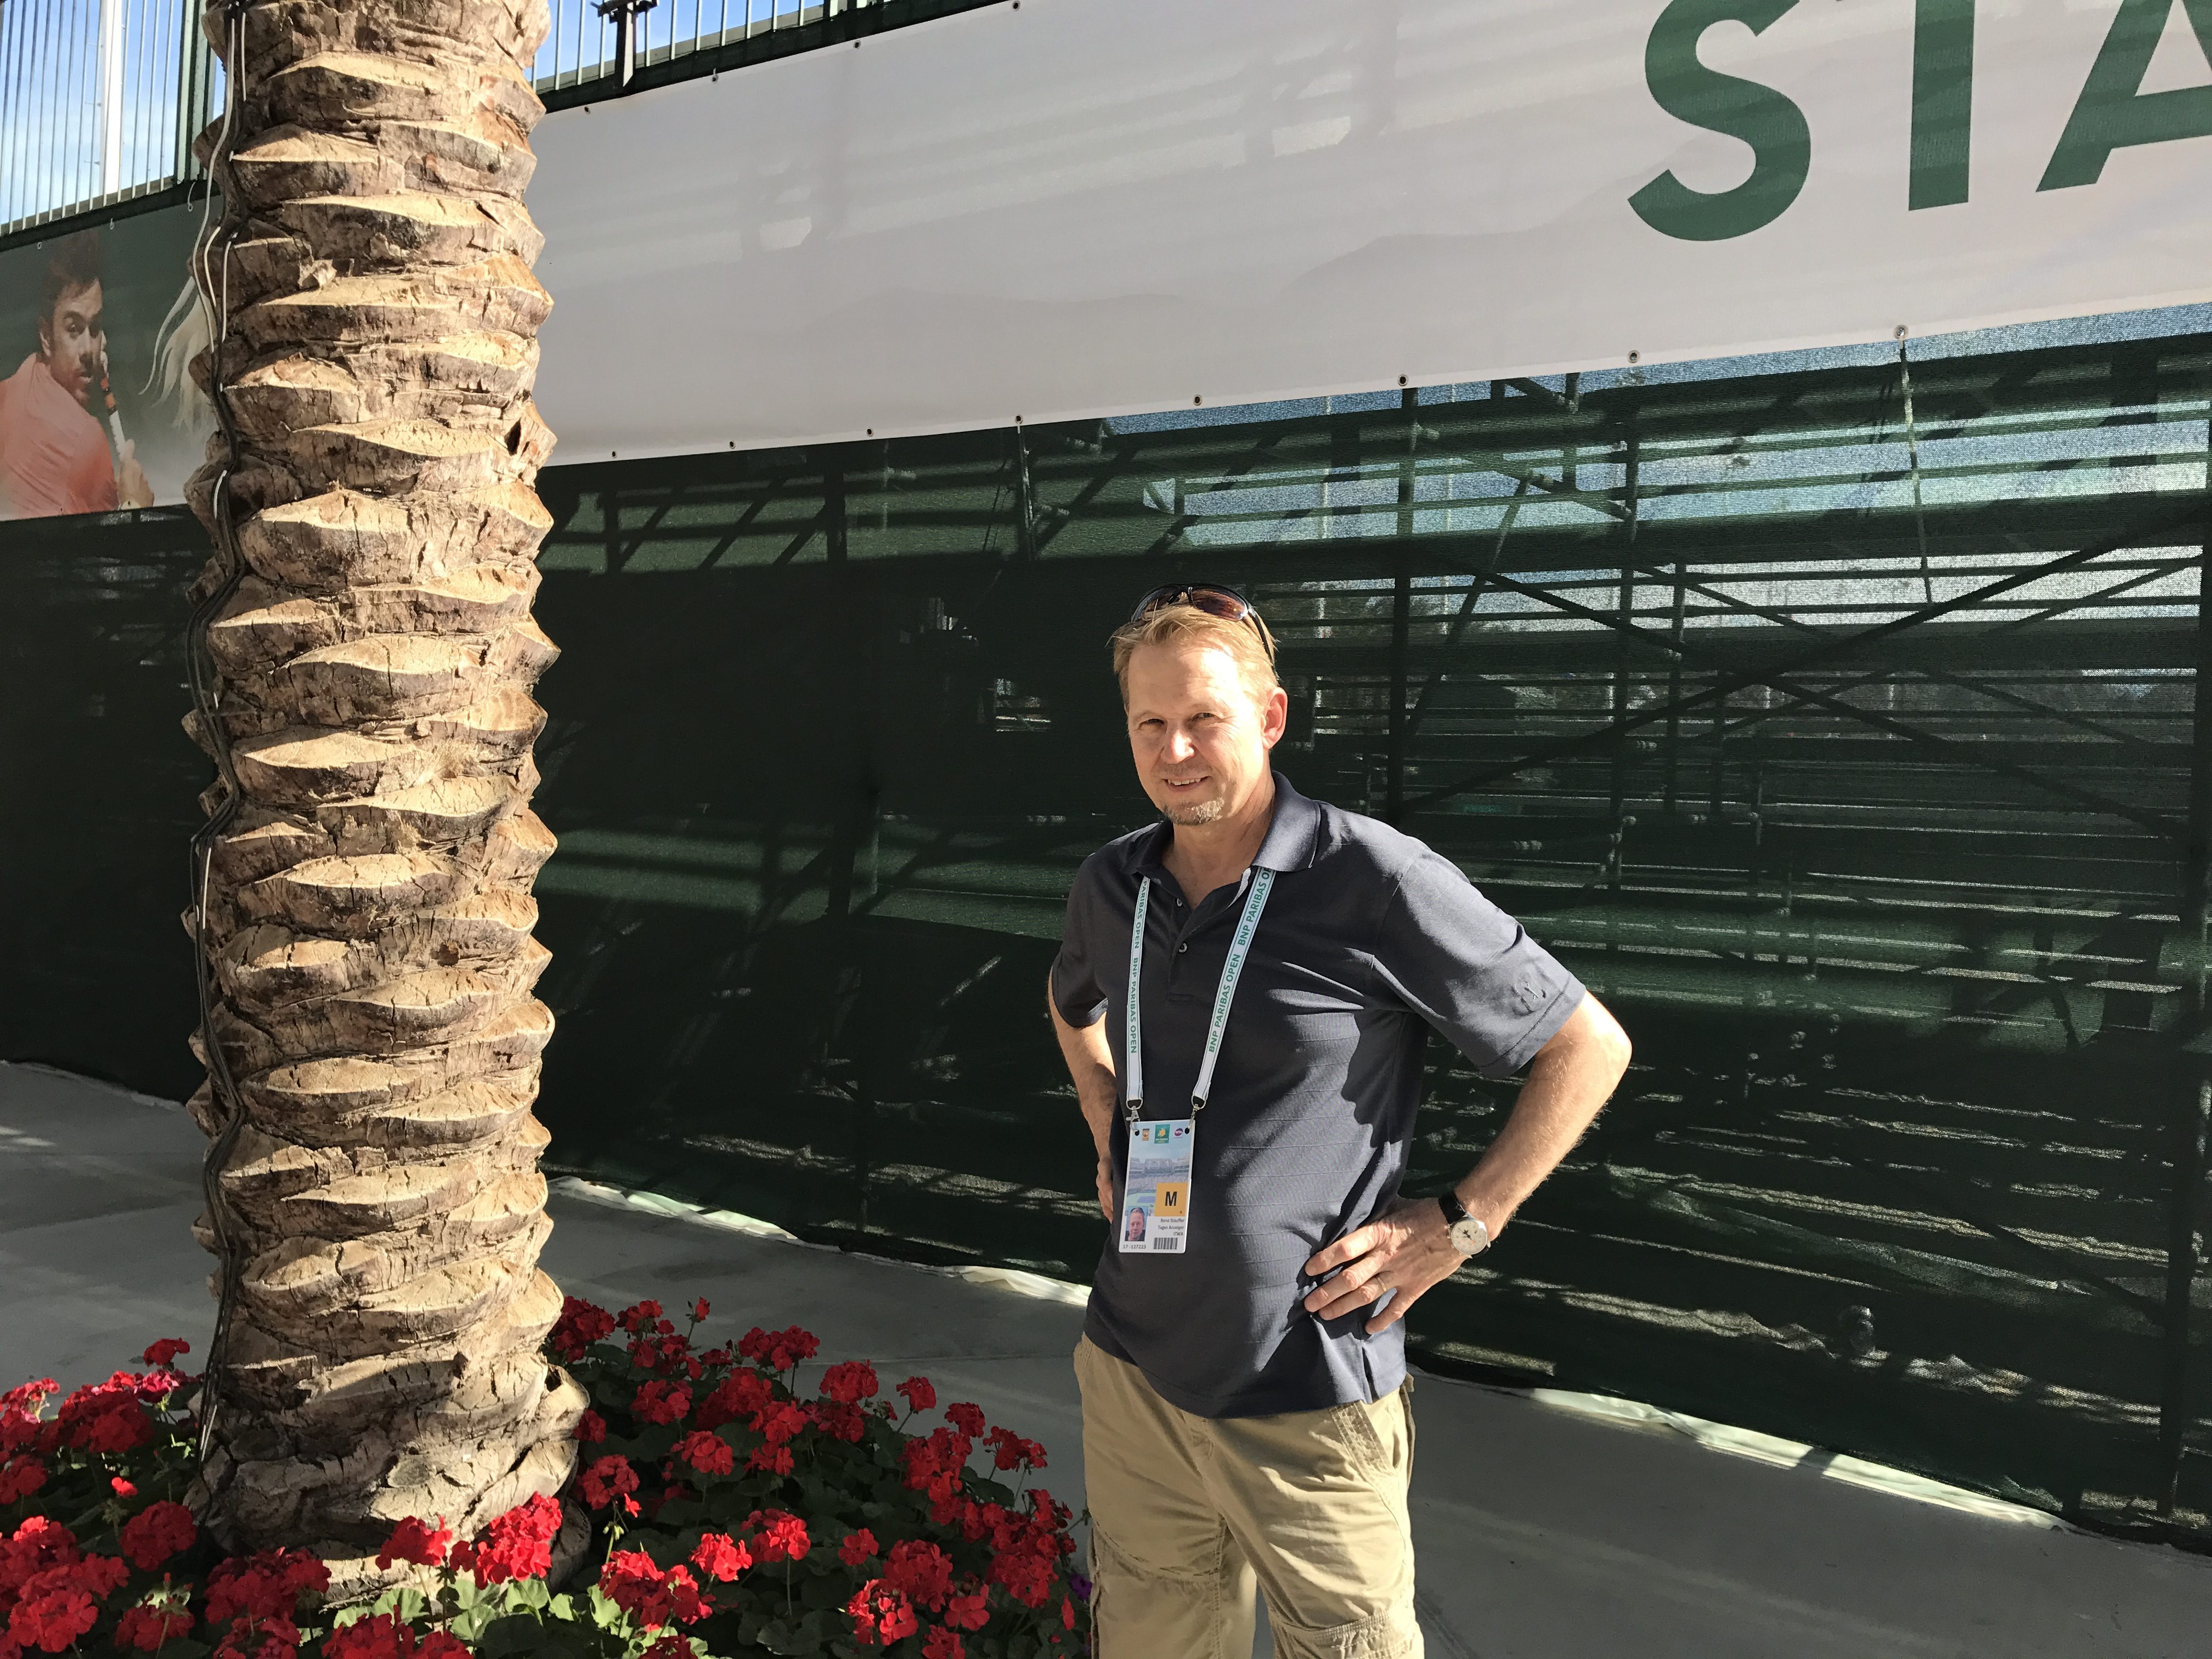 Rene Stauffer from Tages-Anzeiger Interviews with FedFan at 2017 BNP Paribas Open in Indian Wells